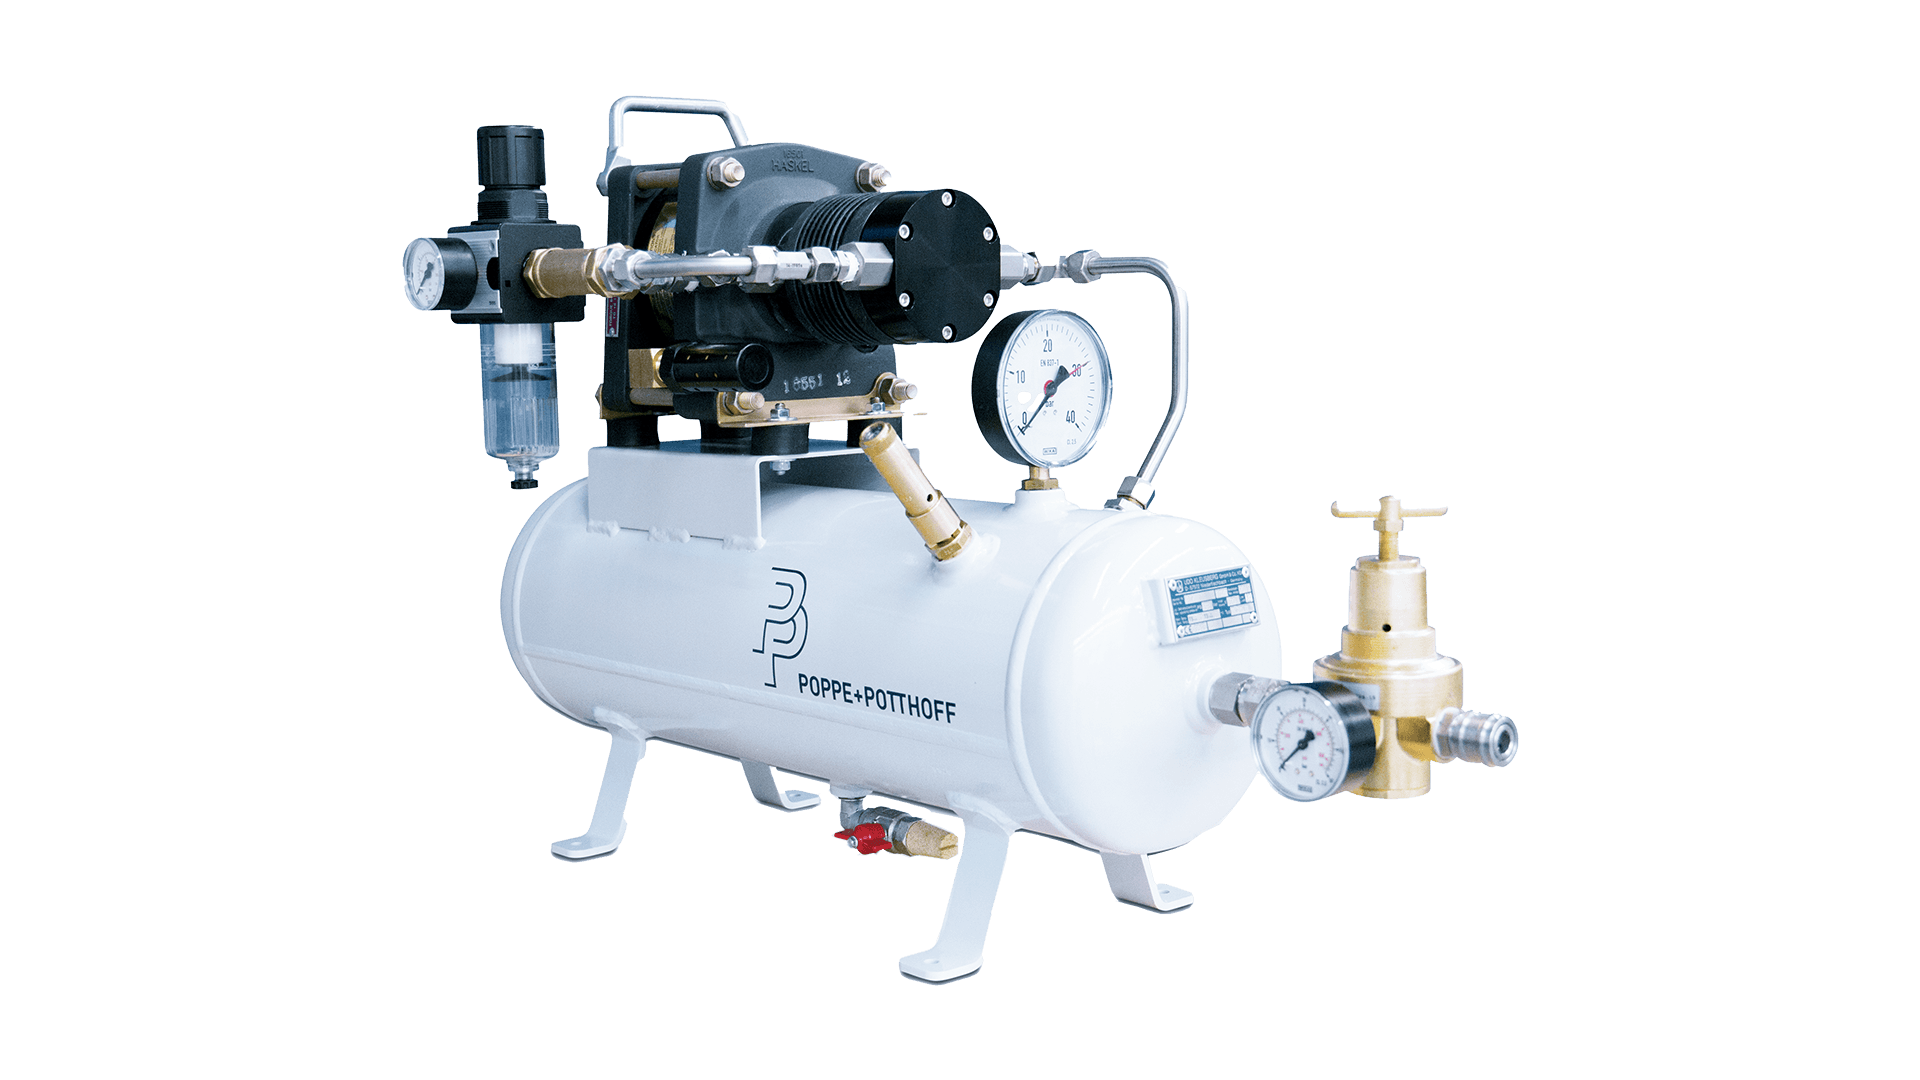 pneumatic air booster unit with pressure gauge up to 50 bar by Poppe + Potthoff Maschinenbau